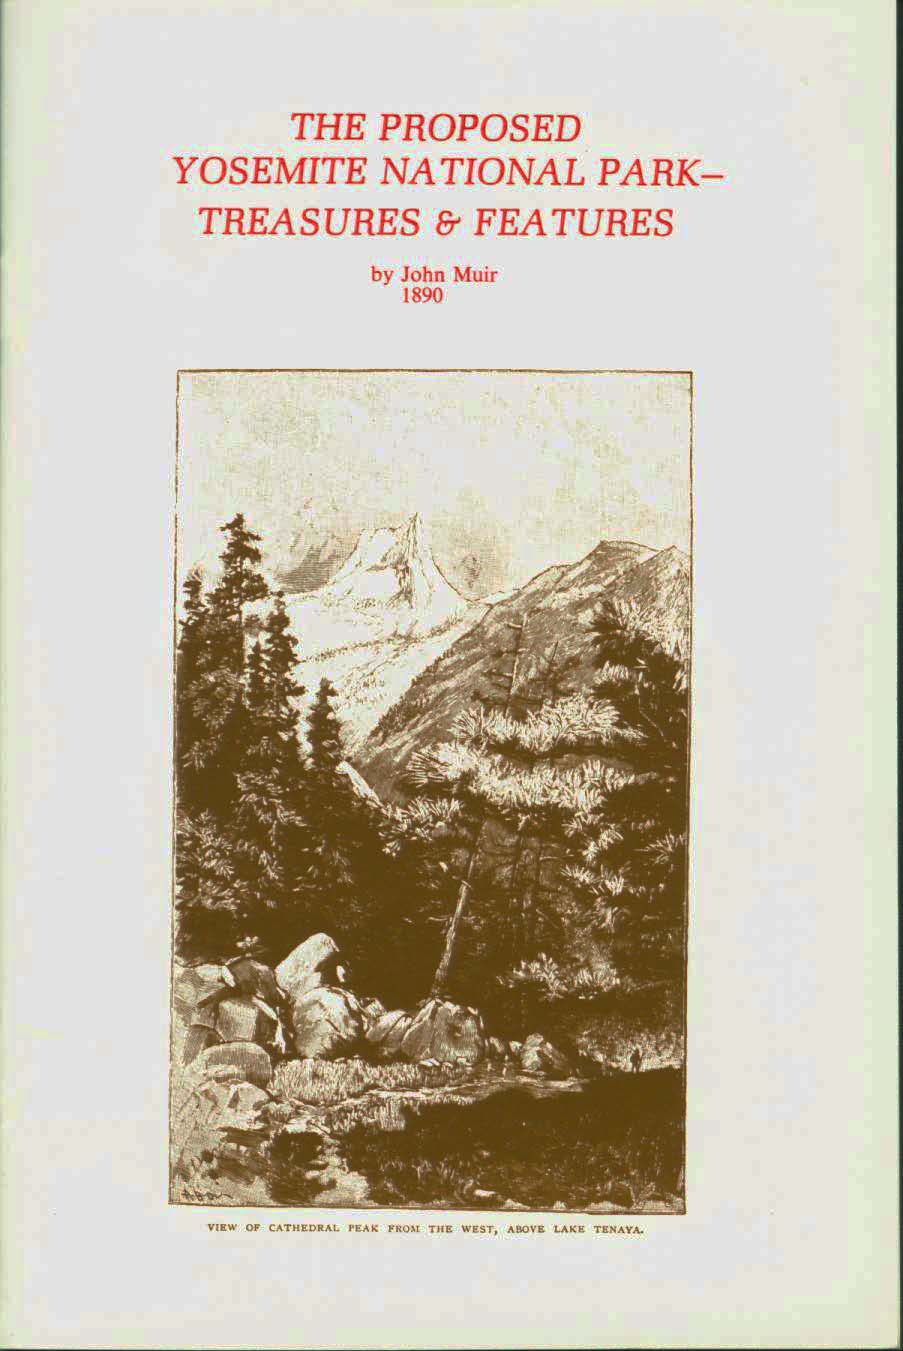 THE PROPOSED YOSEMITE NATIONAL PARK--treasures & features, 1890 (CA).